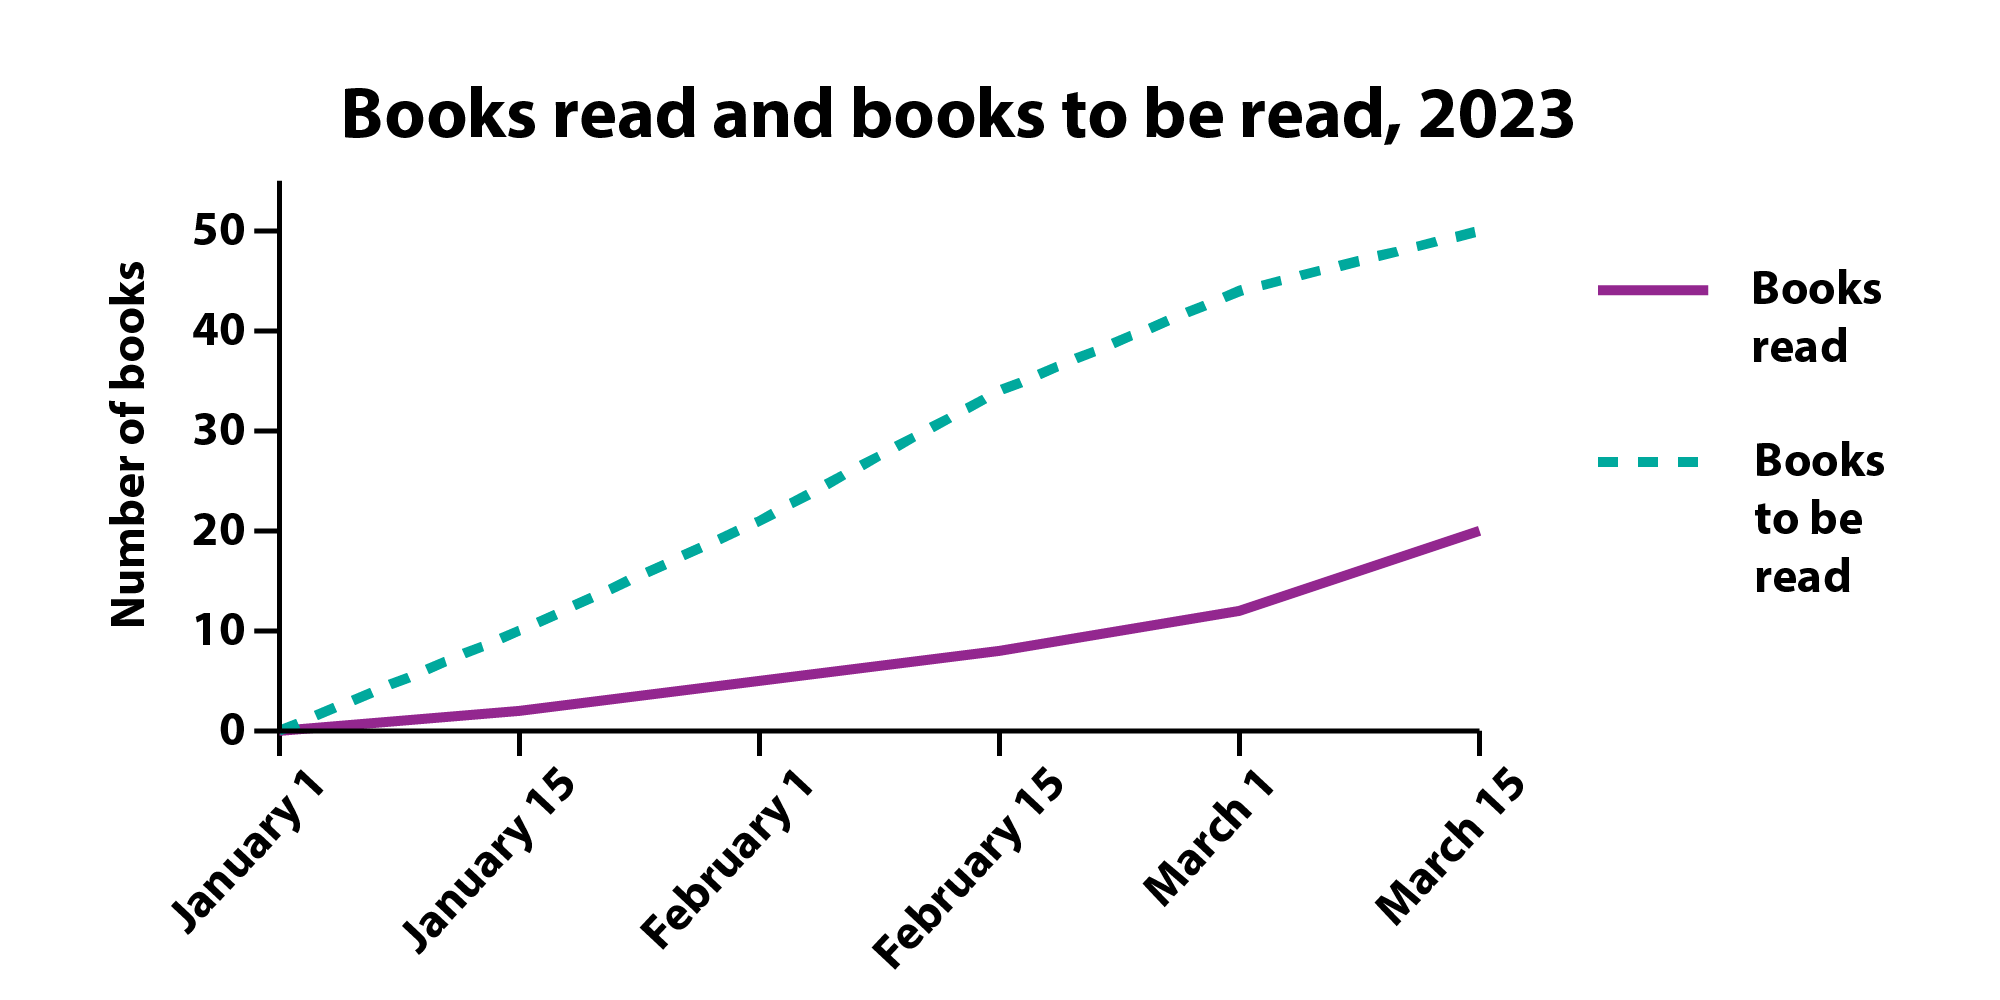 A line graph with the title "Books read and books to be read, 2023" with data points for January 1, January 15, February 1, February 15, March 1, and March 15. Books to be read is increasing at a higher rate than books read.